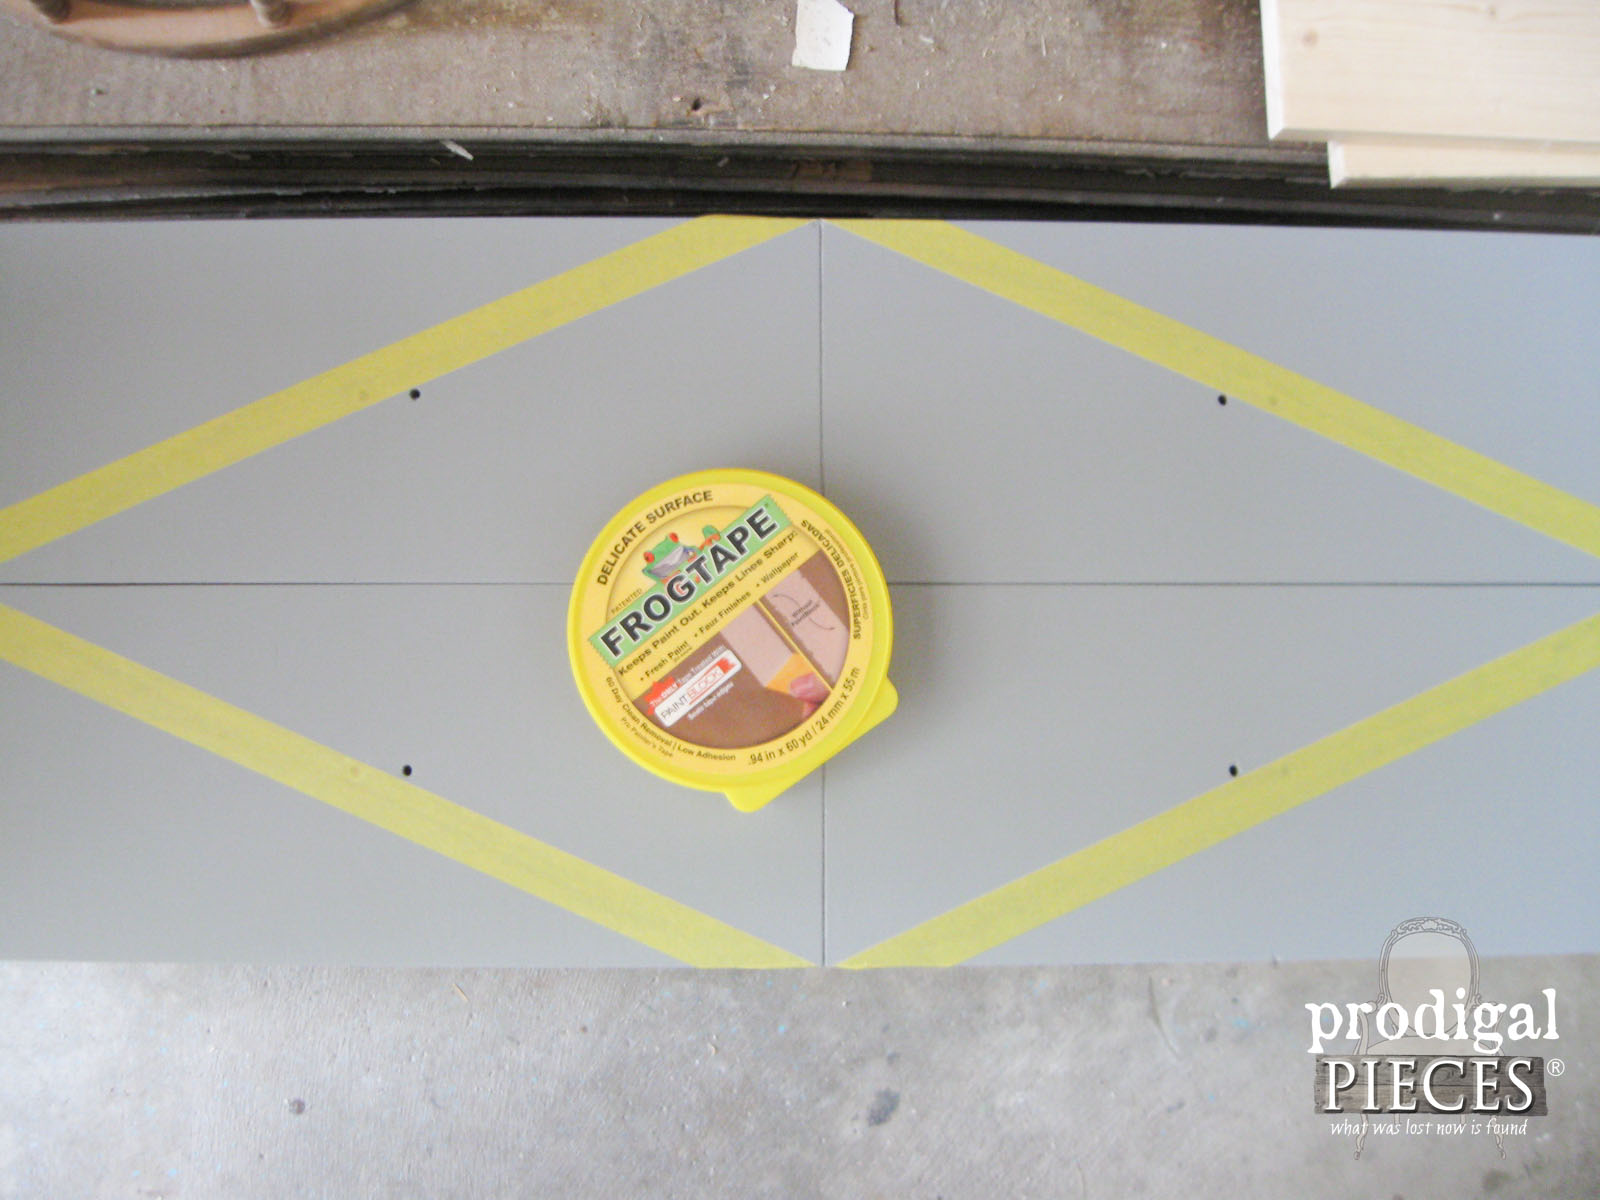 Using Frog Tape for Geometric Design on Entertainment Console | Prodigal Pieces | www.prodigalpieces.com